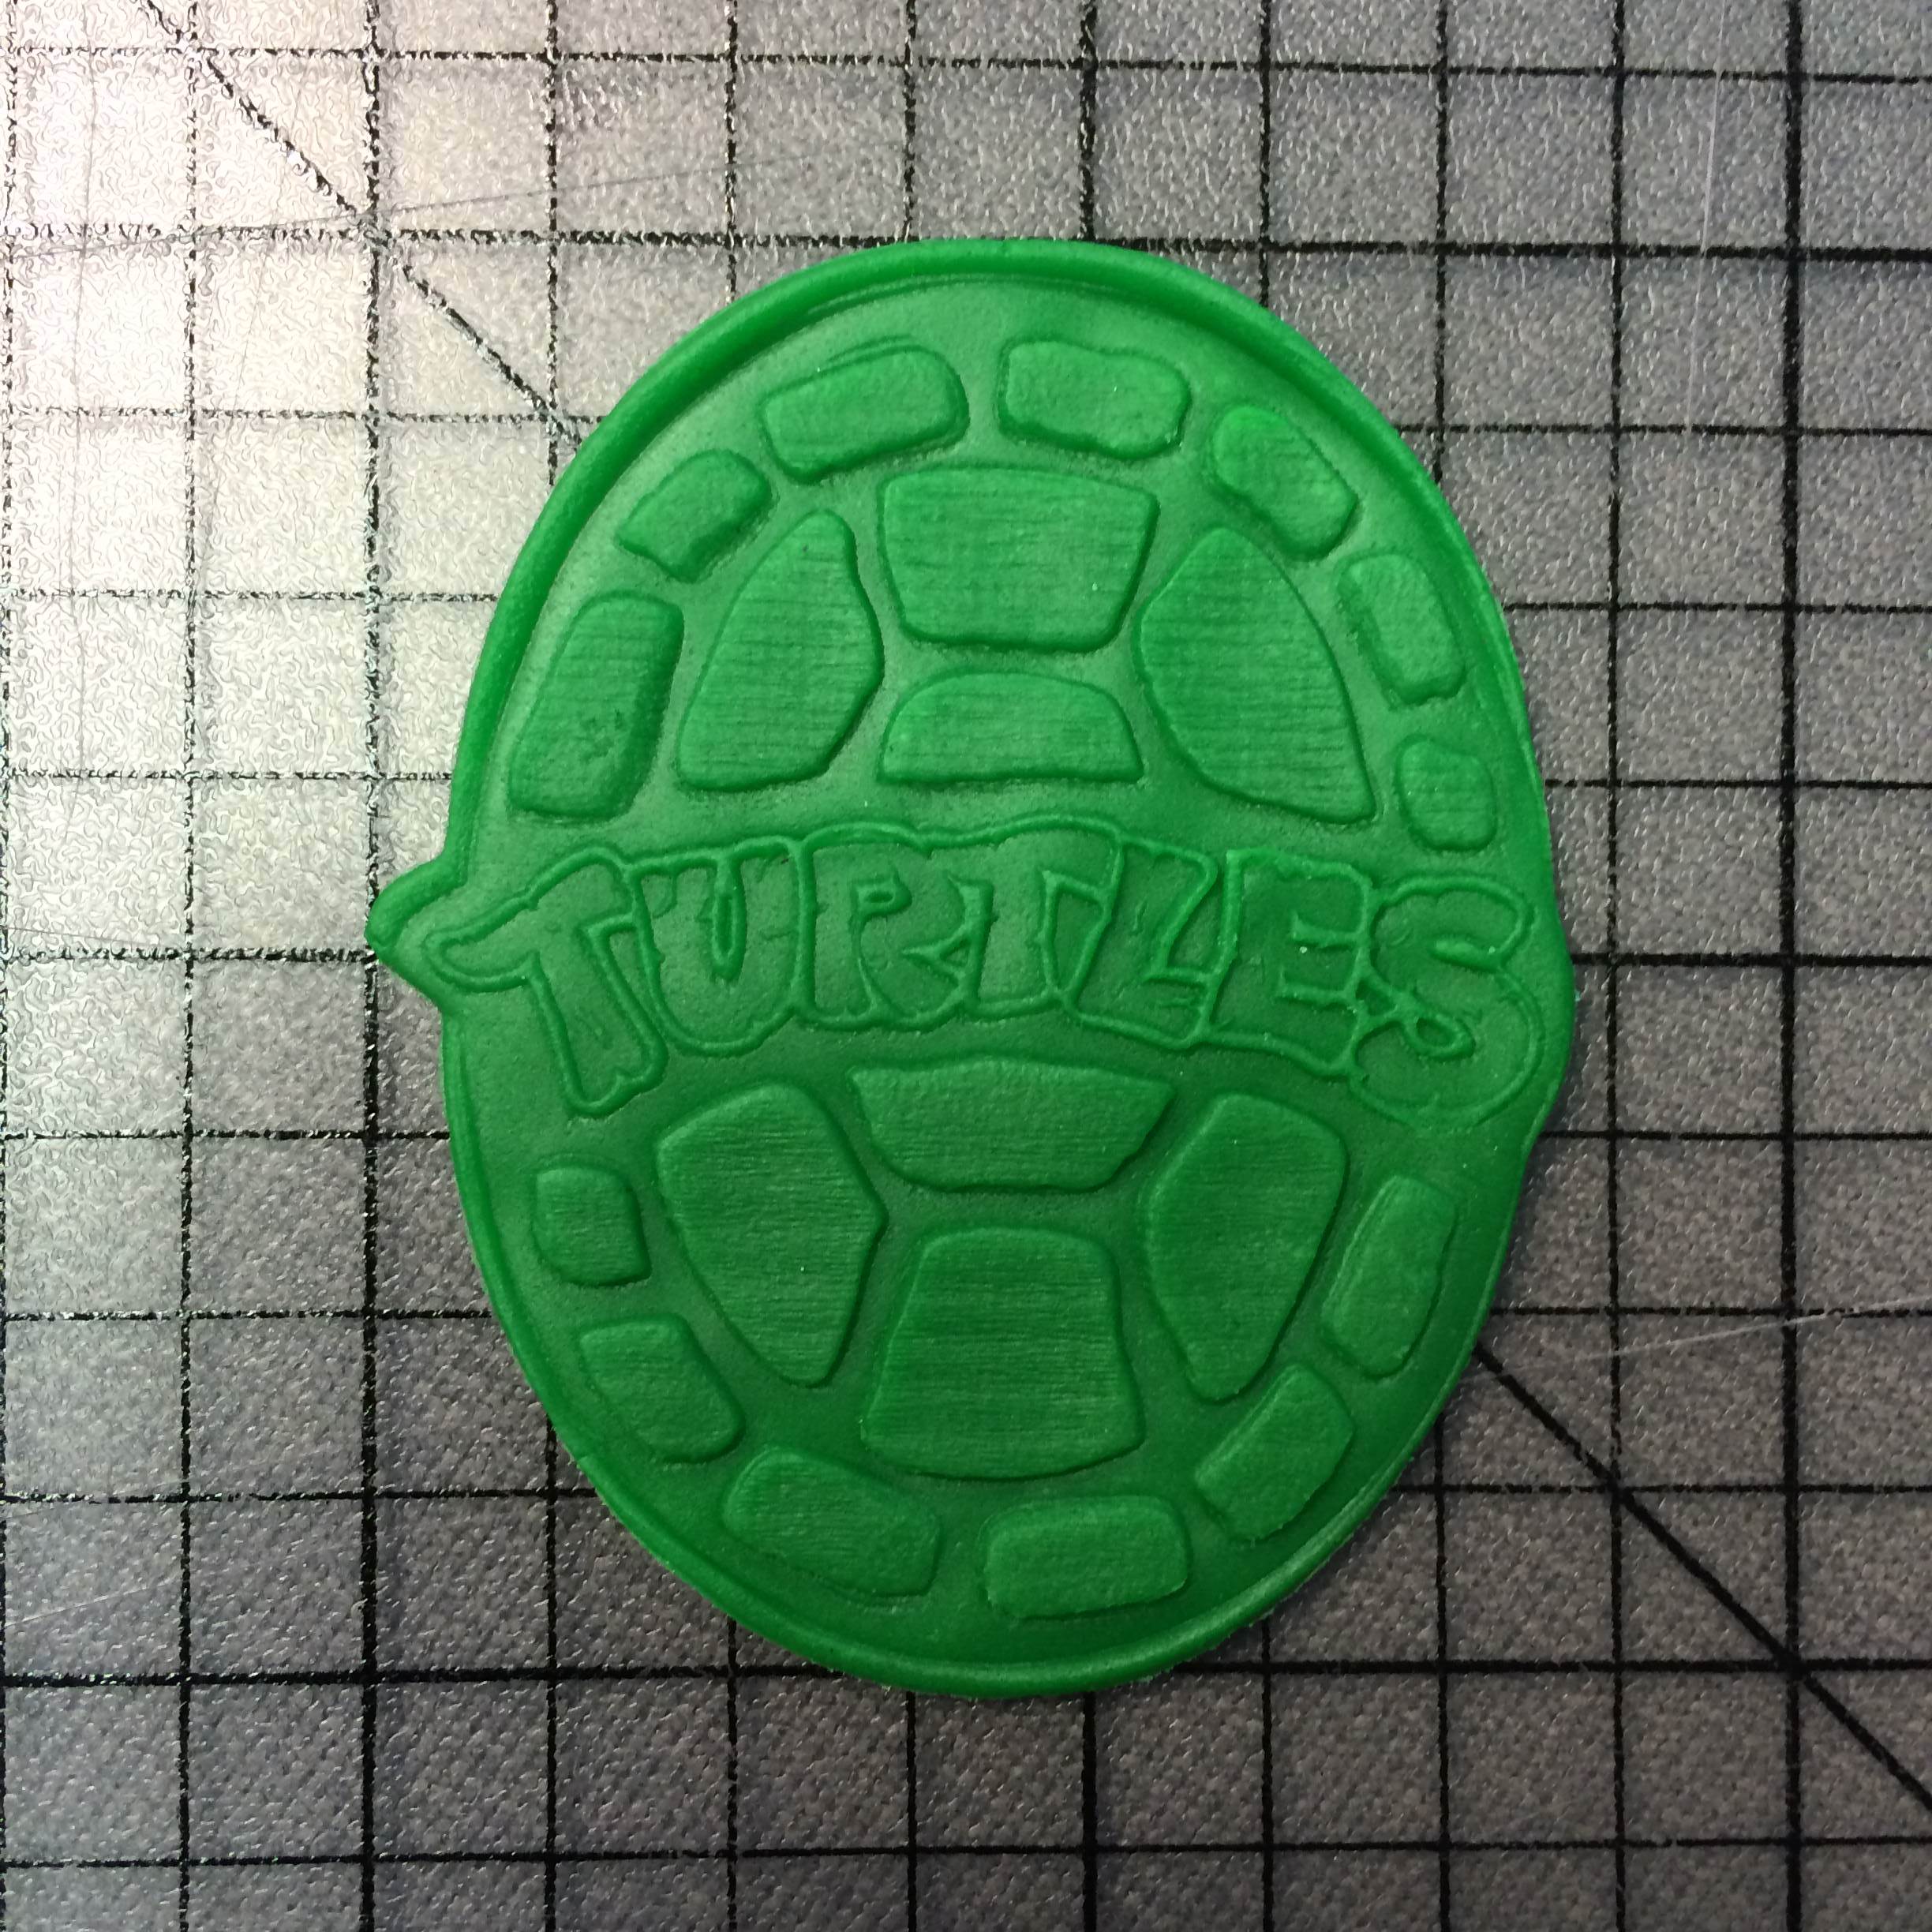 https://www.jbcookiecutters.com/wp-content/uploads/2015/11/TMNT-Turtle-Shell-101-Cookie-Cutter-and-Stamp-2.jpg